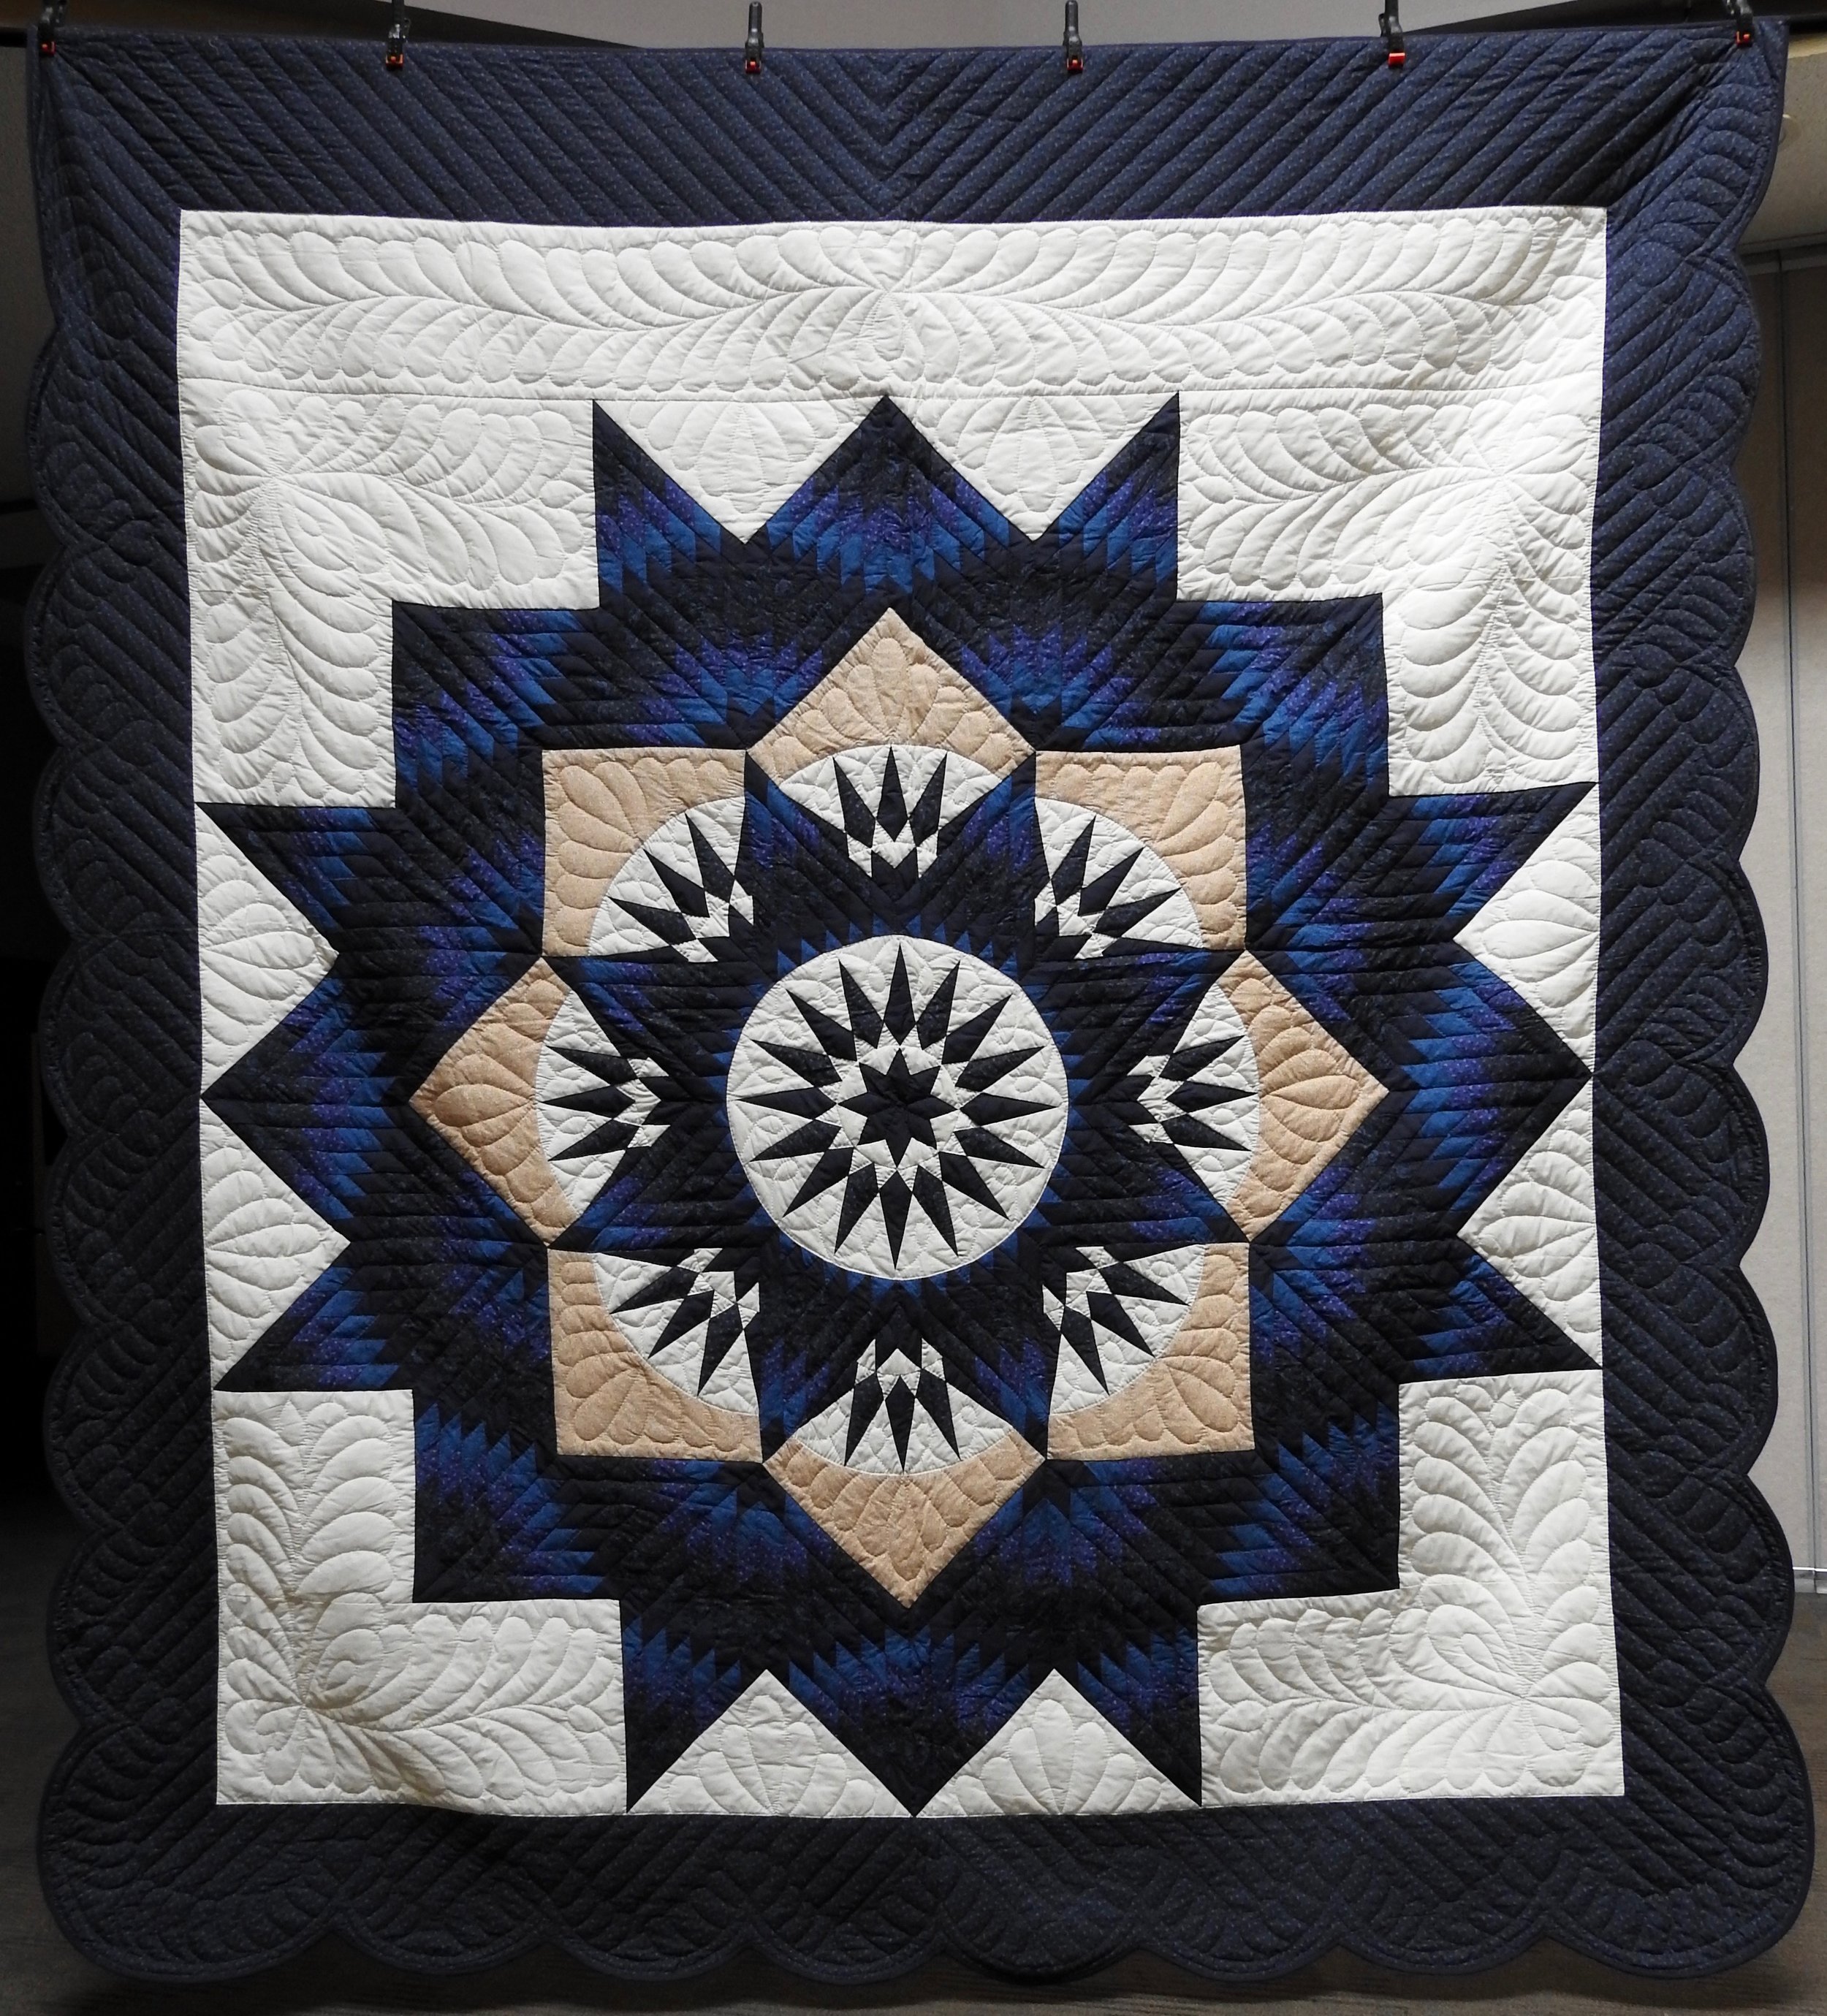  Bright Star, Pieced, Hand Quilted, donated Anonymously, 103 x 112”